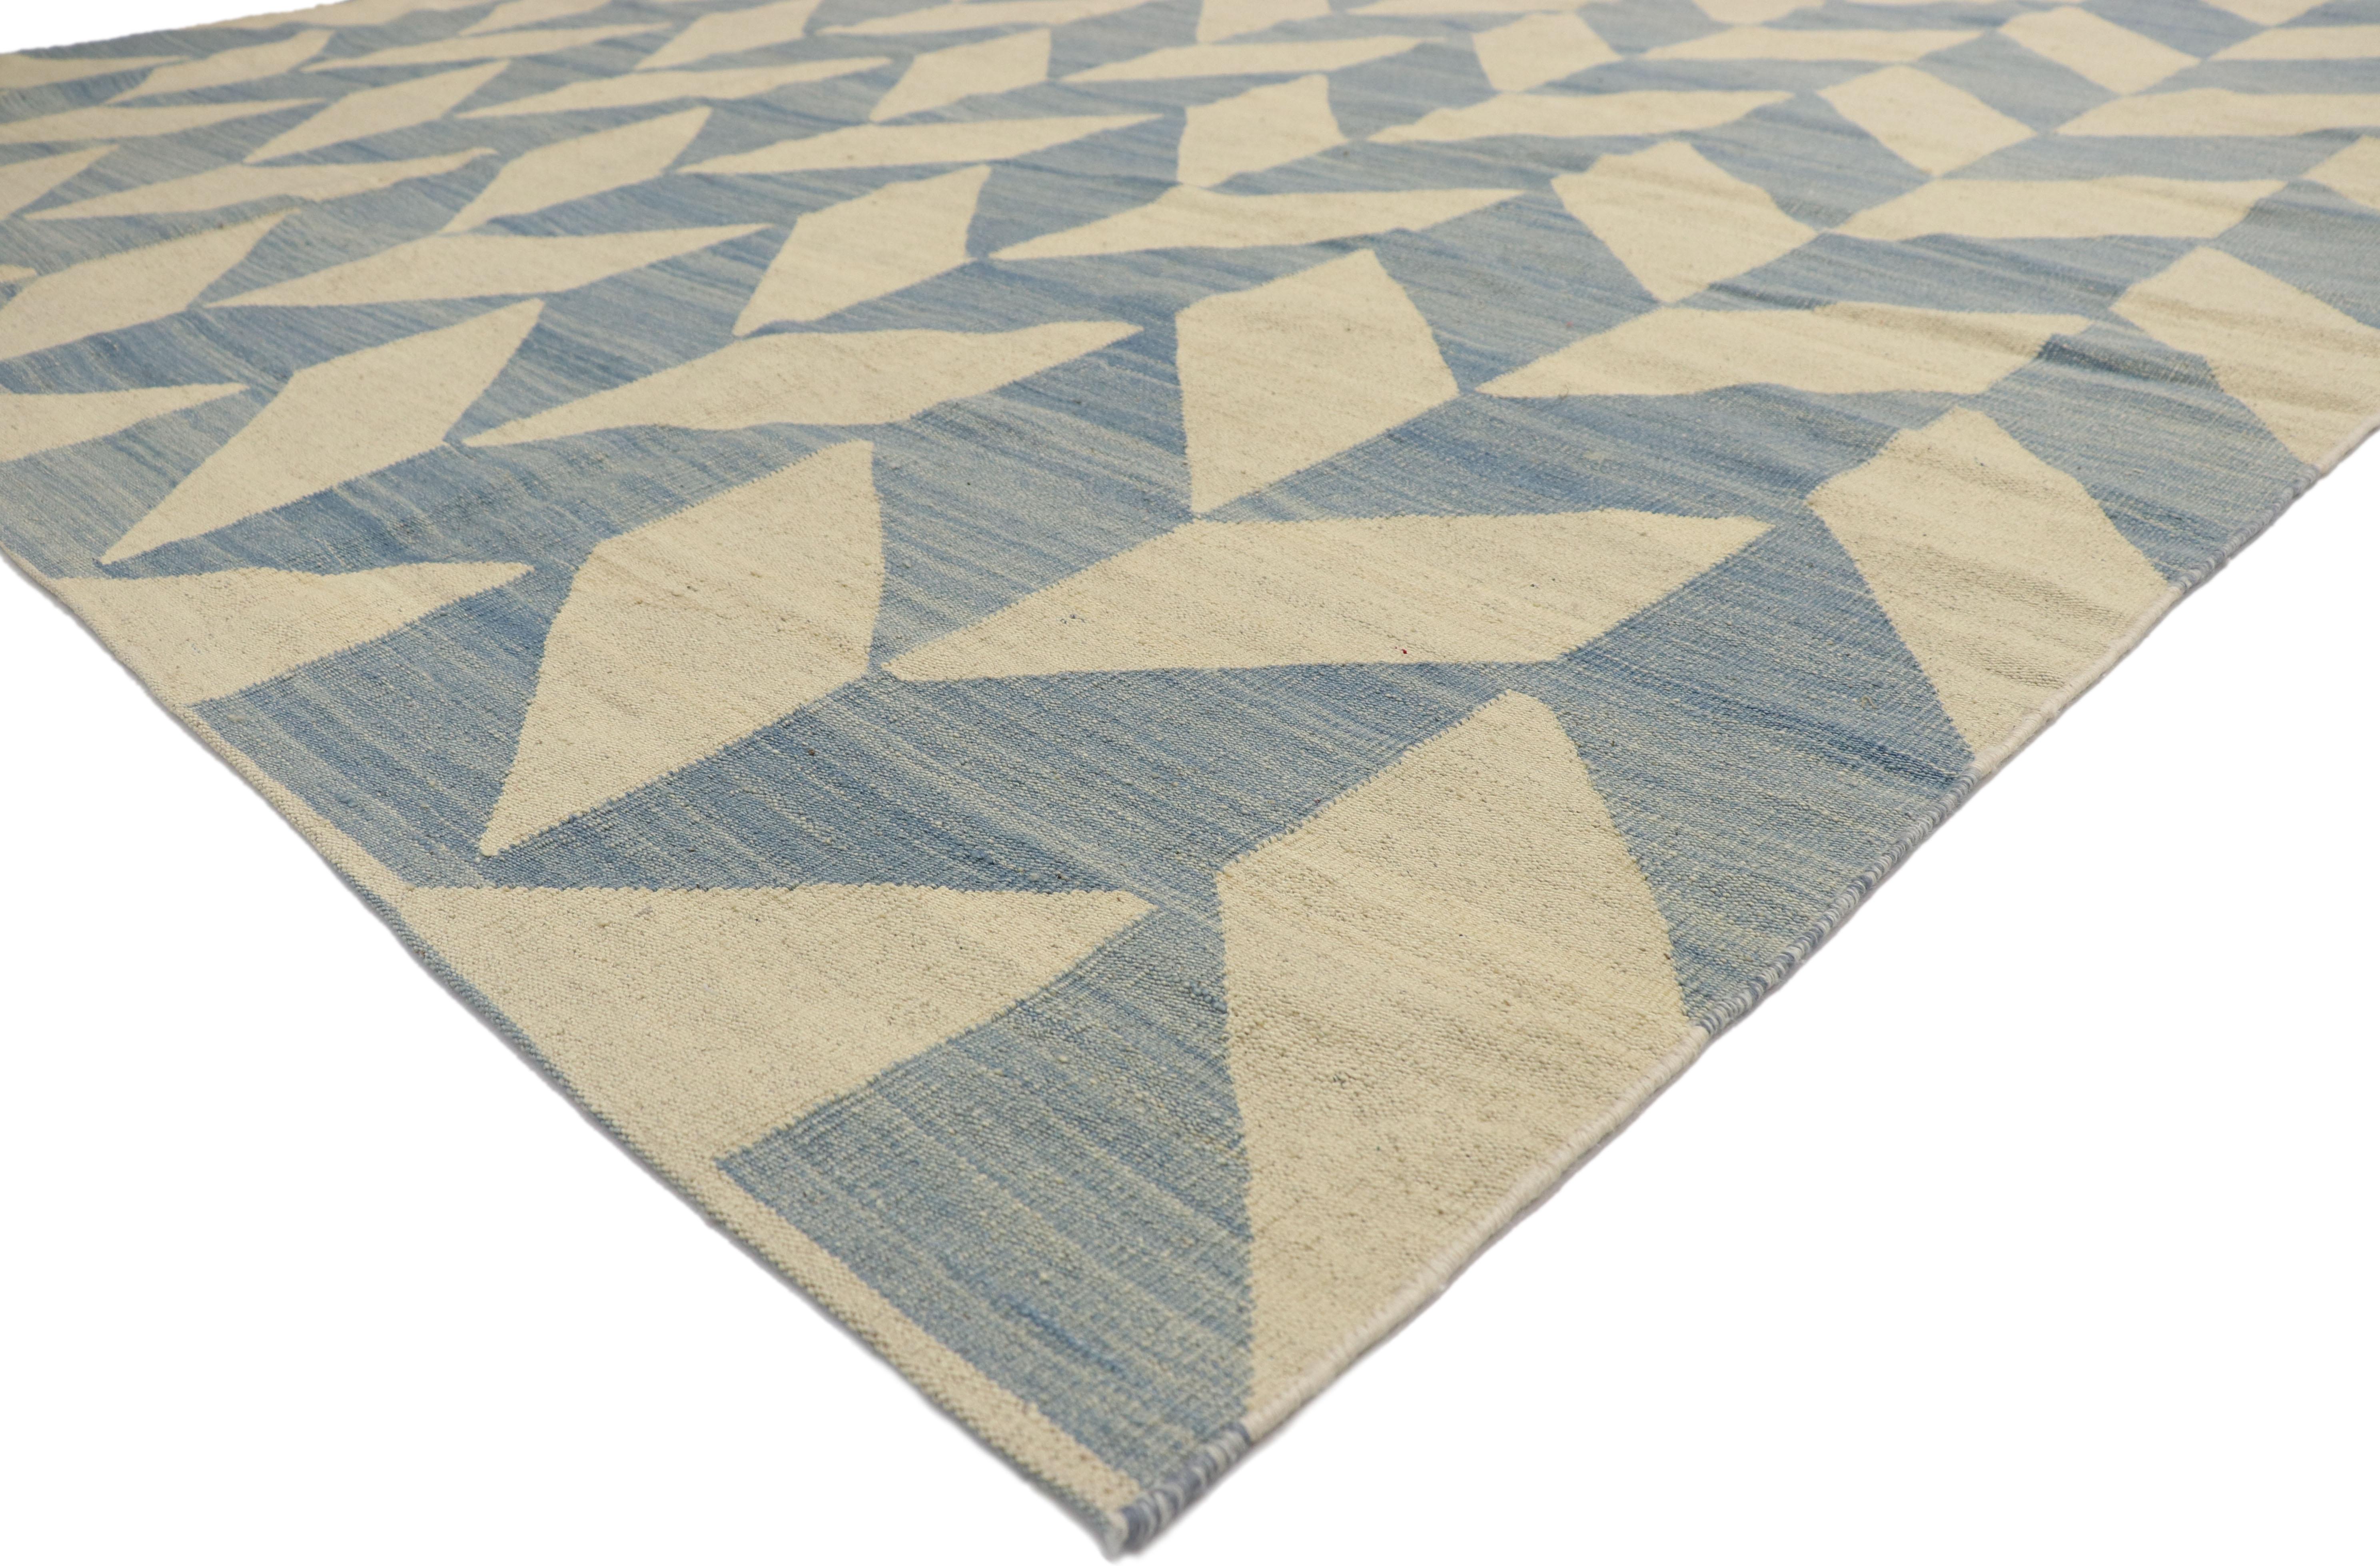 80097 Vintage Afghan Herringbone Kilim Rug with Southern Living Coastal Style. This handwoven wool vintage kilim area rug features a classic Herringbone pattern and coastal style in a subtle color palette. The flat-weave kilim rug displays a